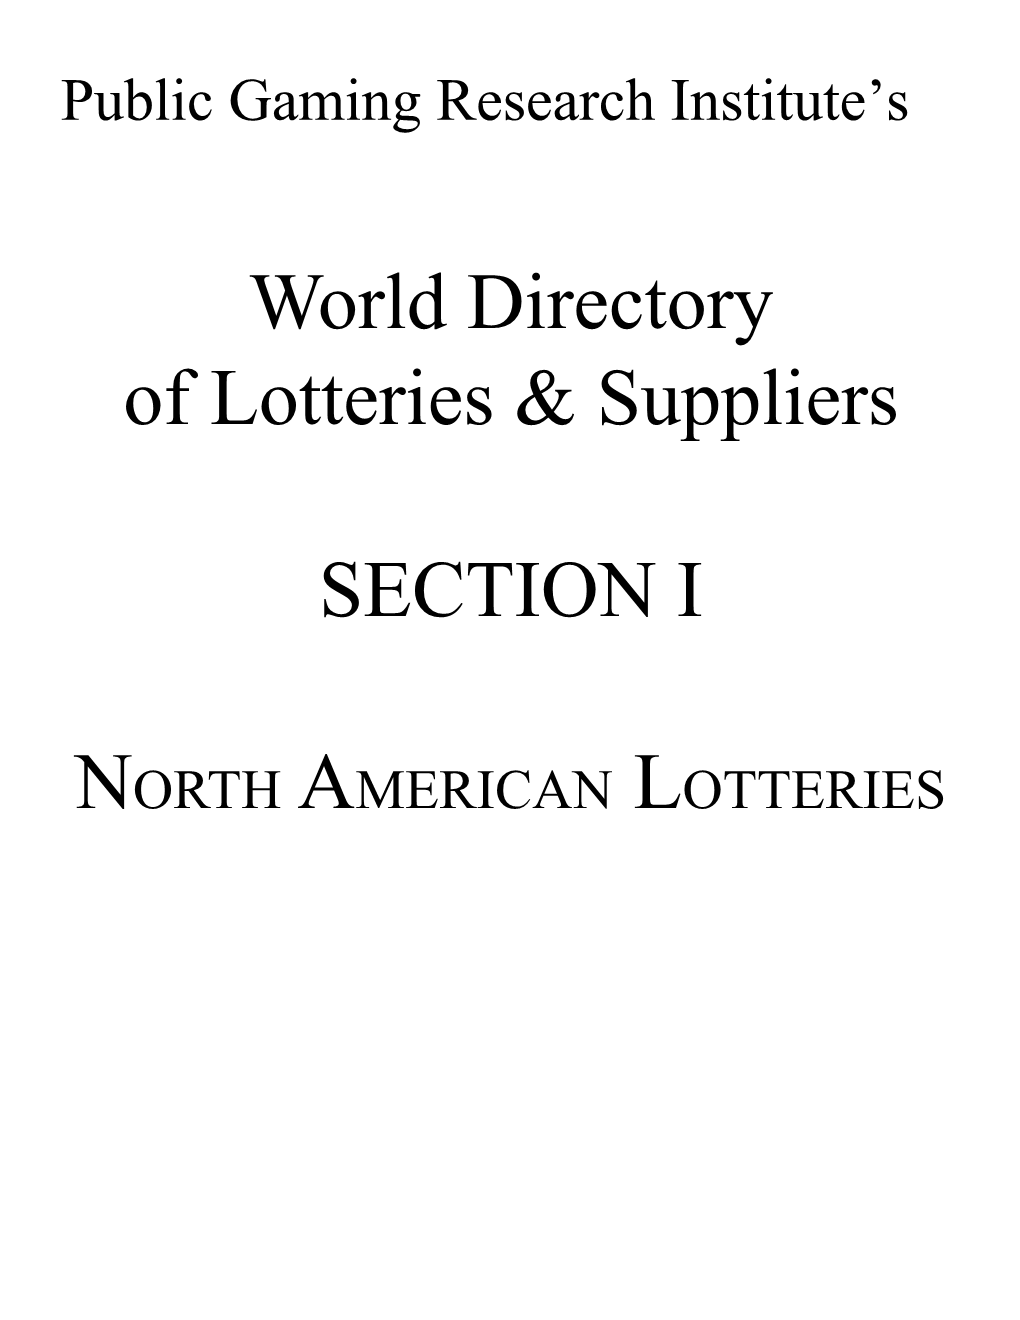 World Directory of Lotteries & Suppliers SECTION I